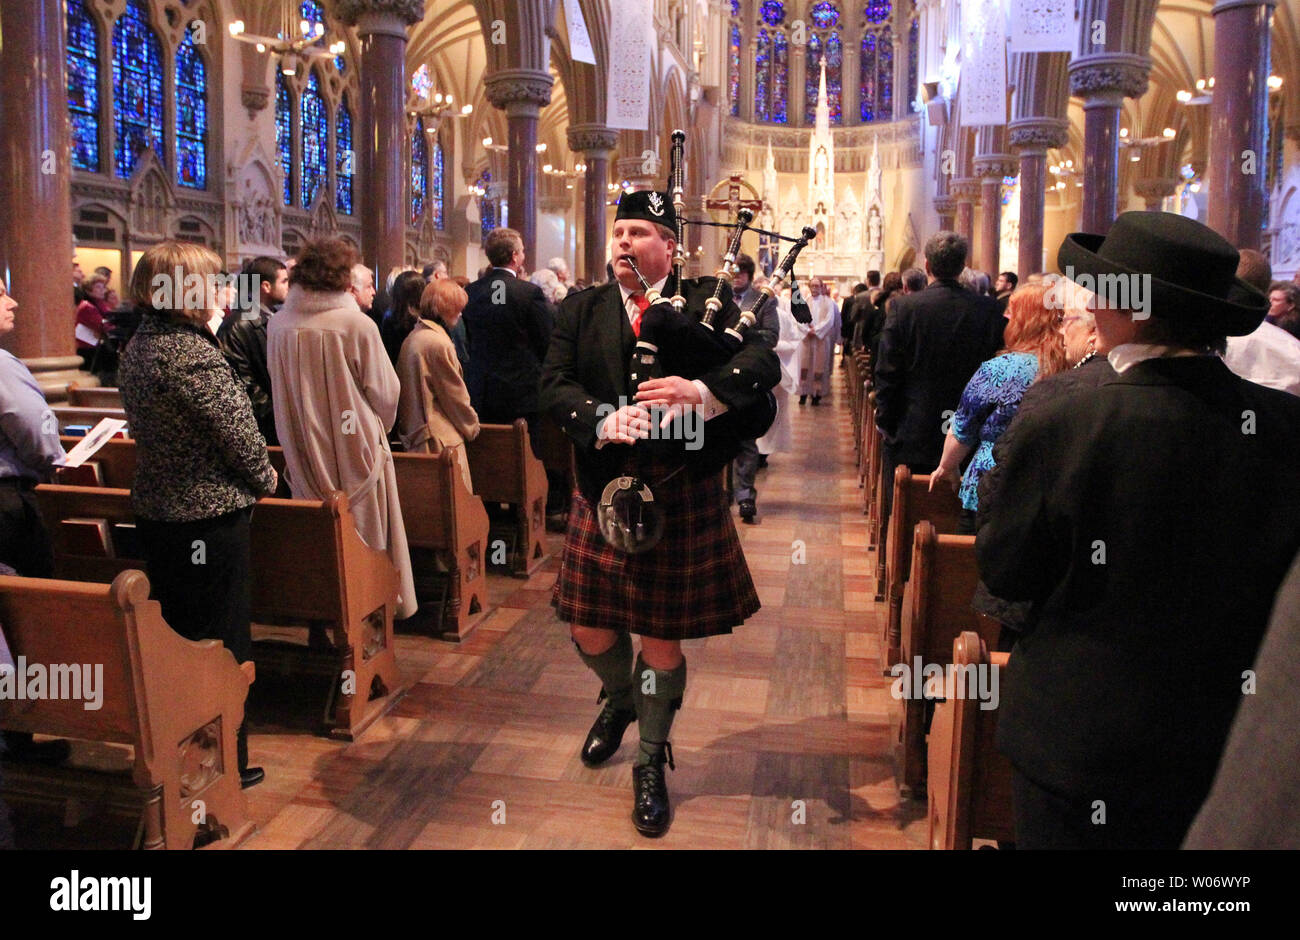 A bagpiper leads the casket of Max Starkloff, an activist for disability rights, out of the  Saint Francis Xavier College Church during his funeral in St. Louis on January 4, 2011. Starkloff, who died on December 27, 2010 at the age of 73, co-founded Paraquad, a pioneering Center for Independent Living, and in 2003 co-founded the Starkloff Disability Institute. His advocacy secured legislation for first-in-the nation public improvements like curb cuts, disabled parking, city bus lifts and the passage of the landmark Americans with Disabilities Act in 1990. Starkloff was the co-founder of the N Stock Photo